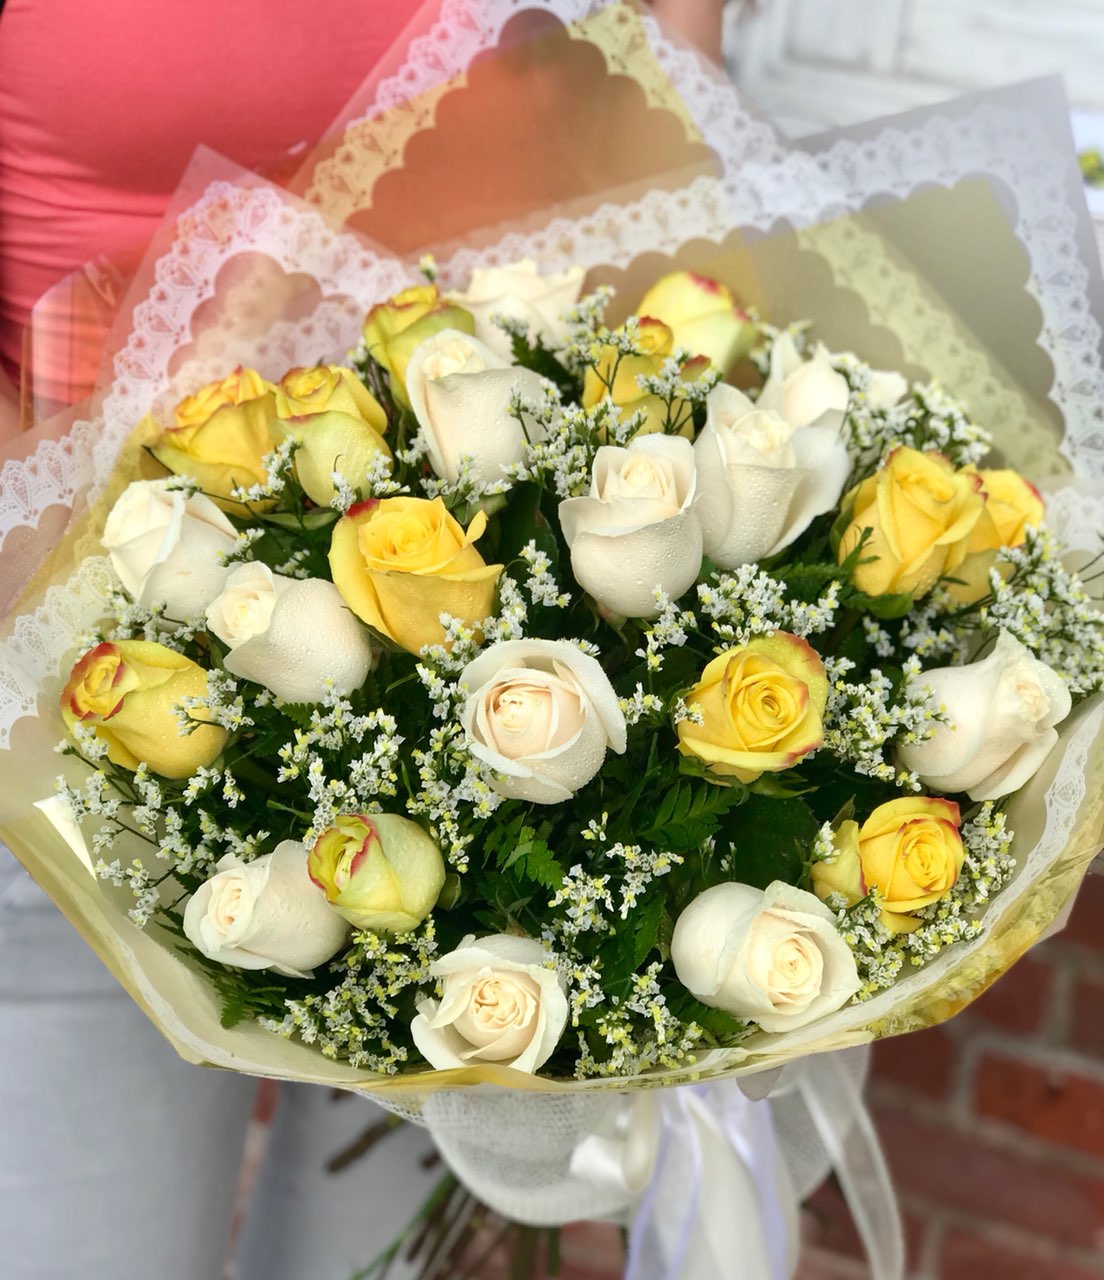 What a bright idea! Send a summery treat to someone special with this cheerful bouquet of two dozen yellow and white roses. A happy pick for your fellow yellow-lover!  Includes:  12 yellow roses, 12 white roses, limonium, assorted greens. Wrapped in a craft paper Free message card